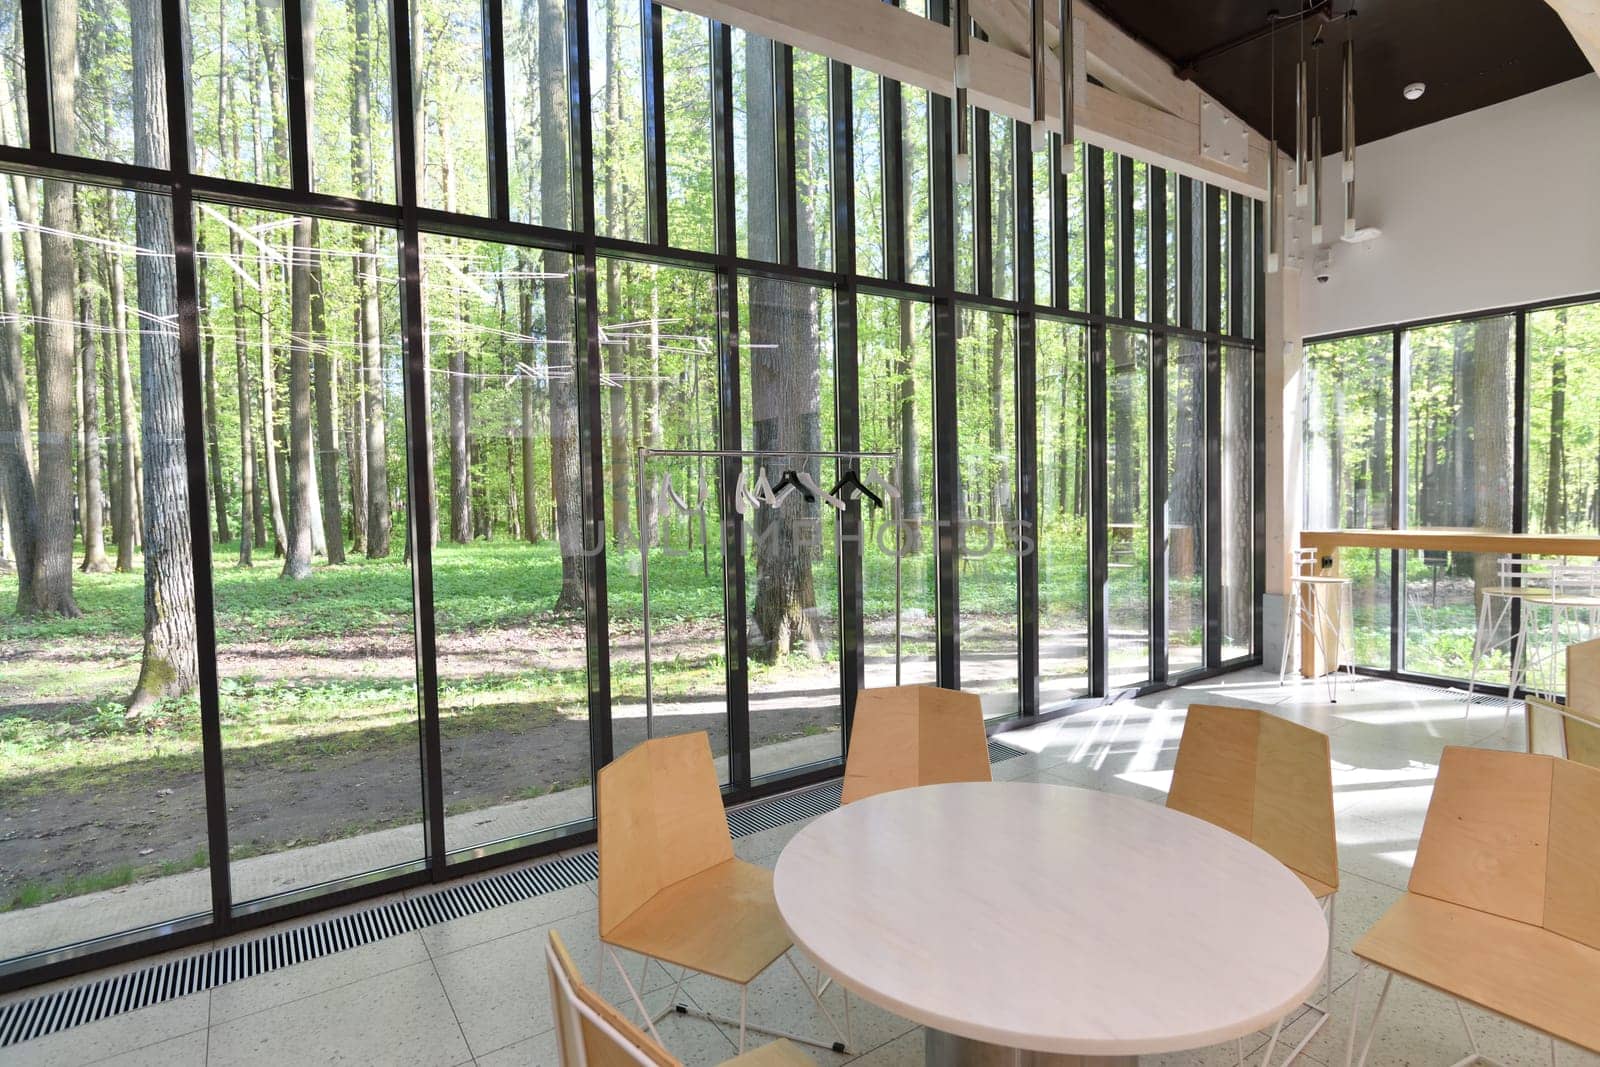 Cafe with glass walls and a forest views